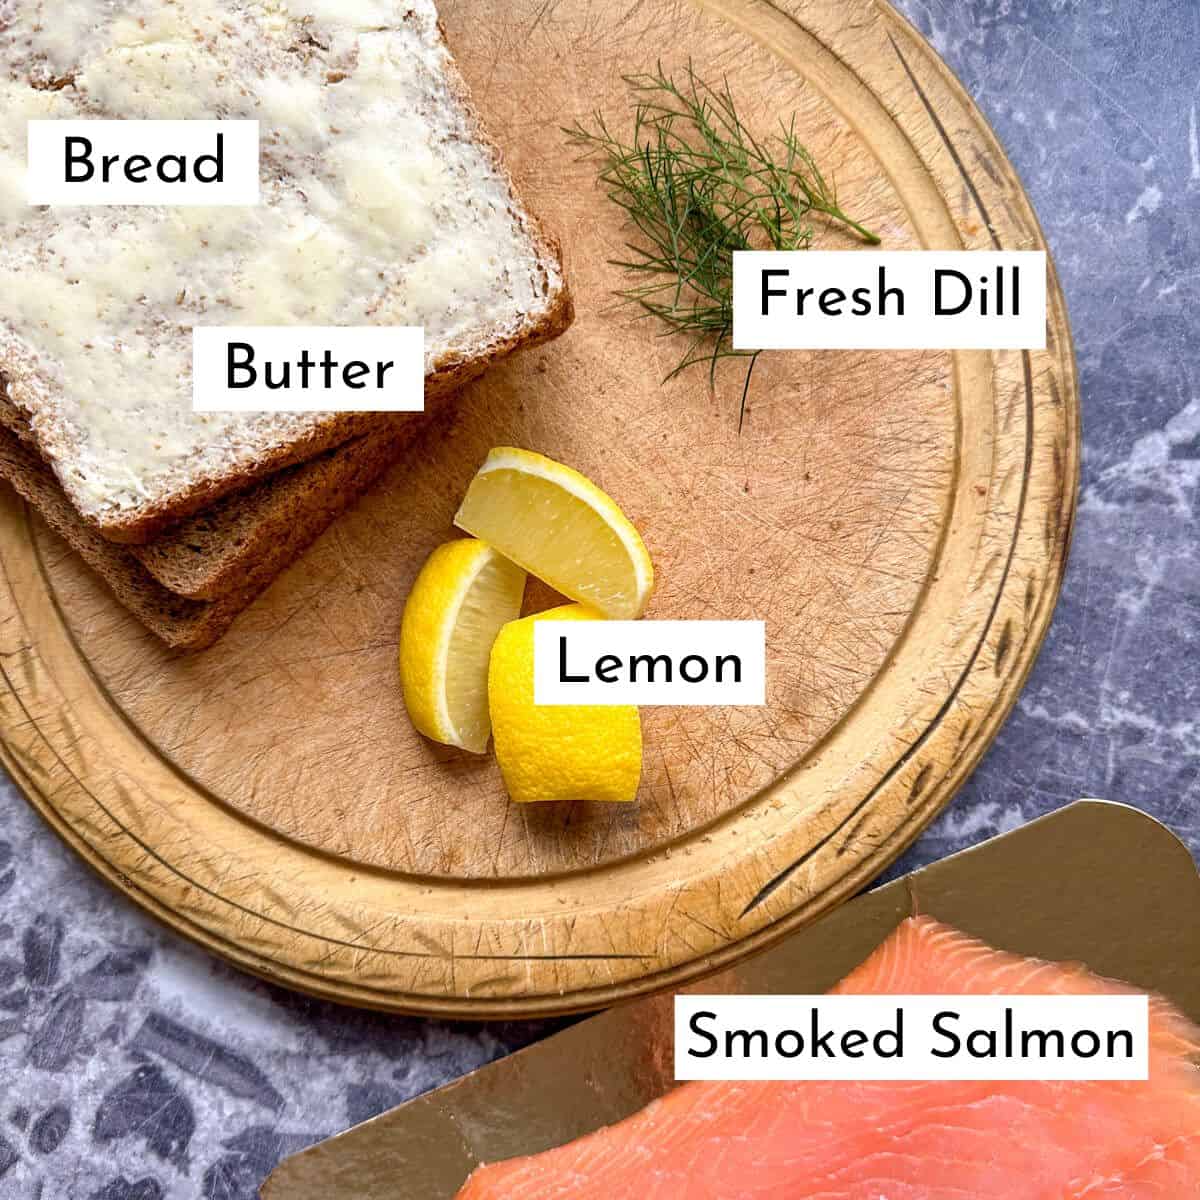 Ingredients for smoked salmon canapes. Bread, butter, dill, lemon and smoked salmon slices. 